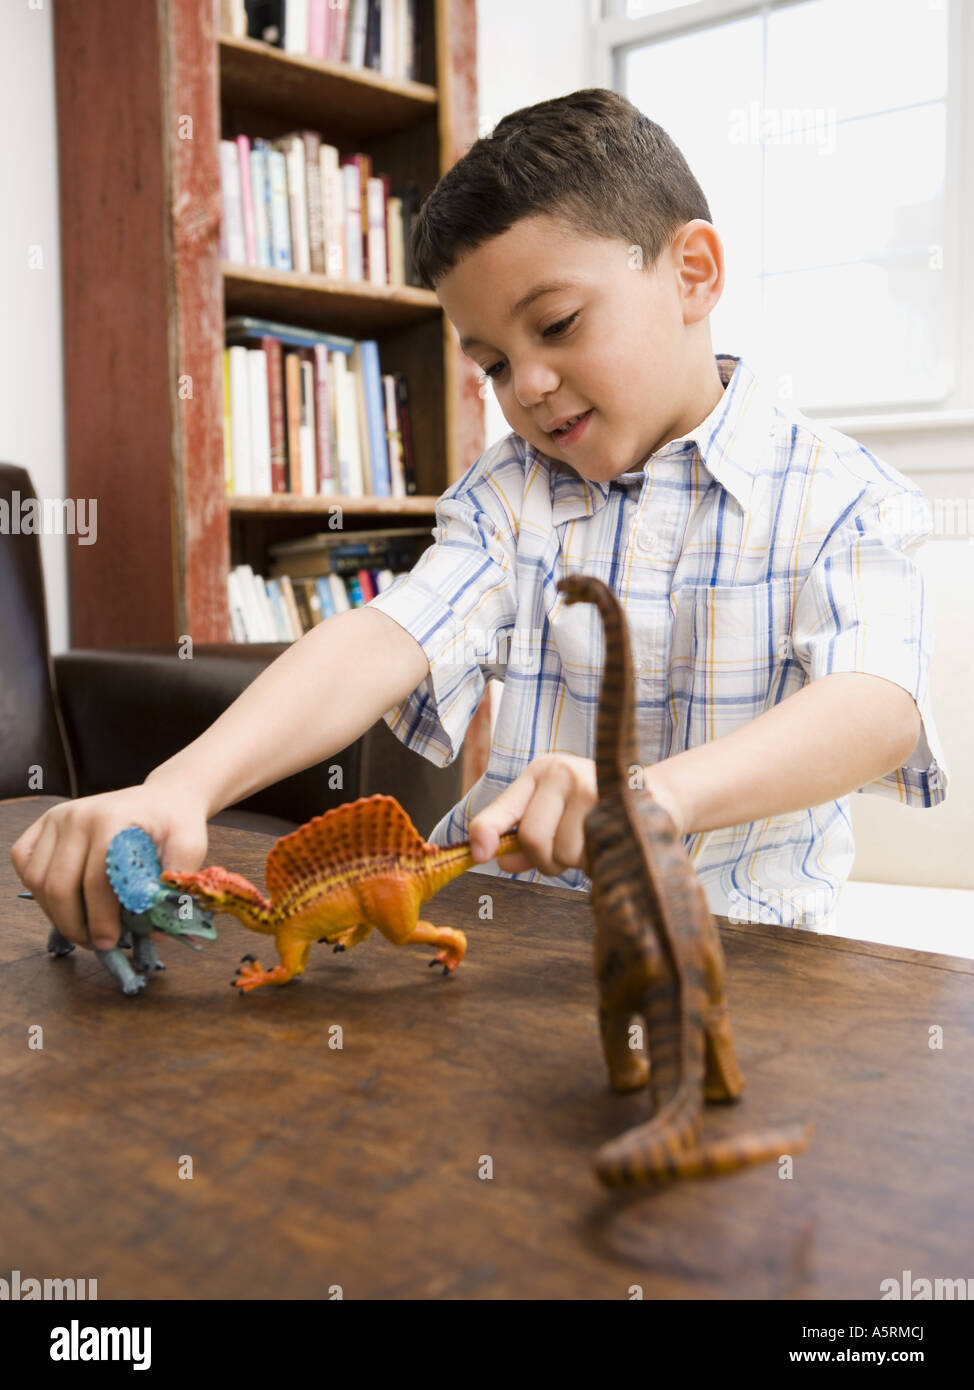 Young boy playing with toy dinosaur figures Stock Photo